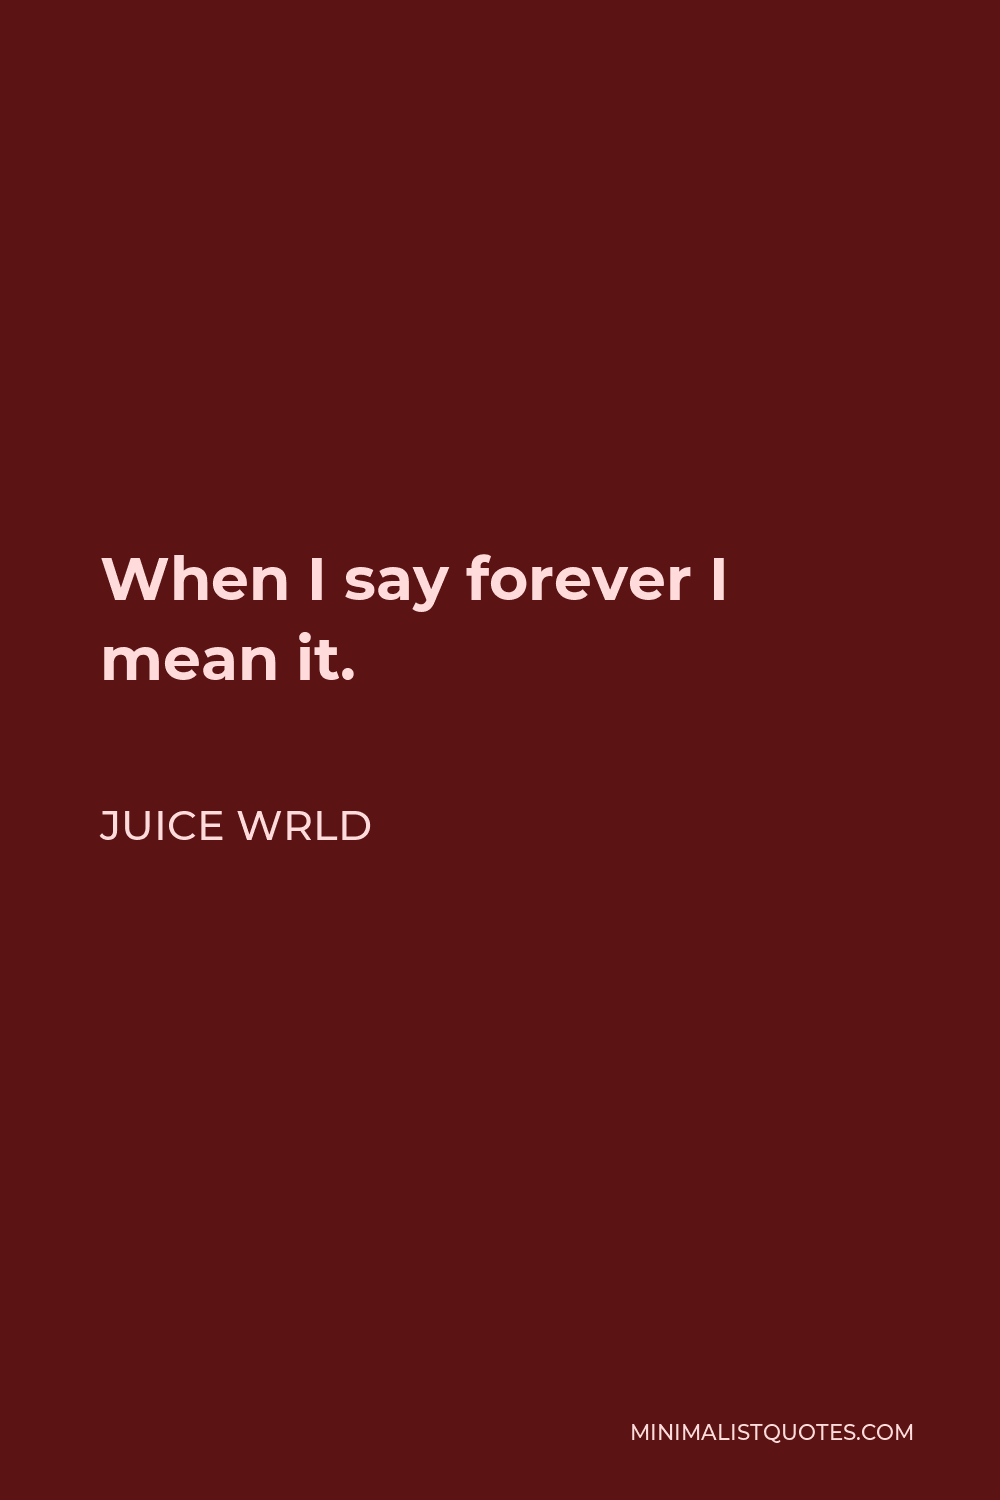 Juice Wrld Quote - When I say forever I mean it.